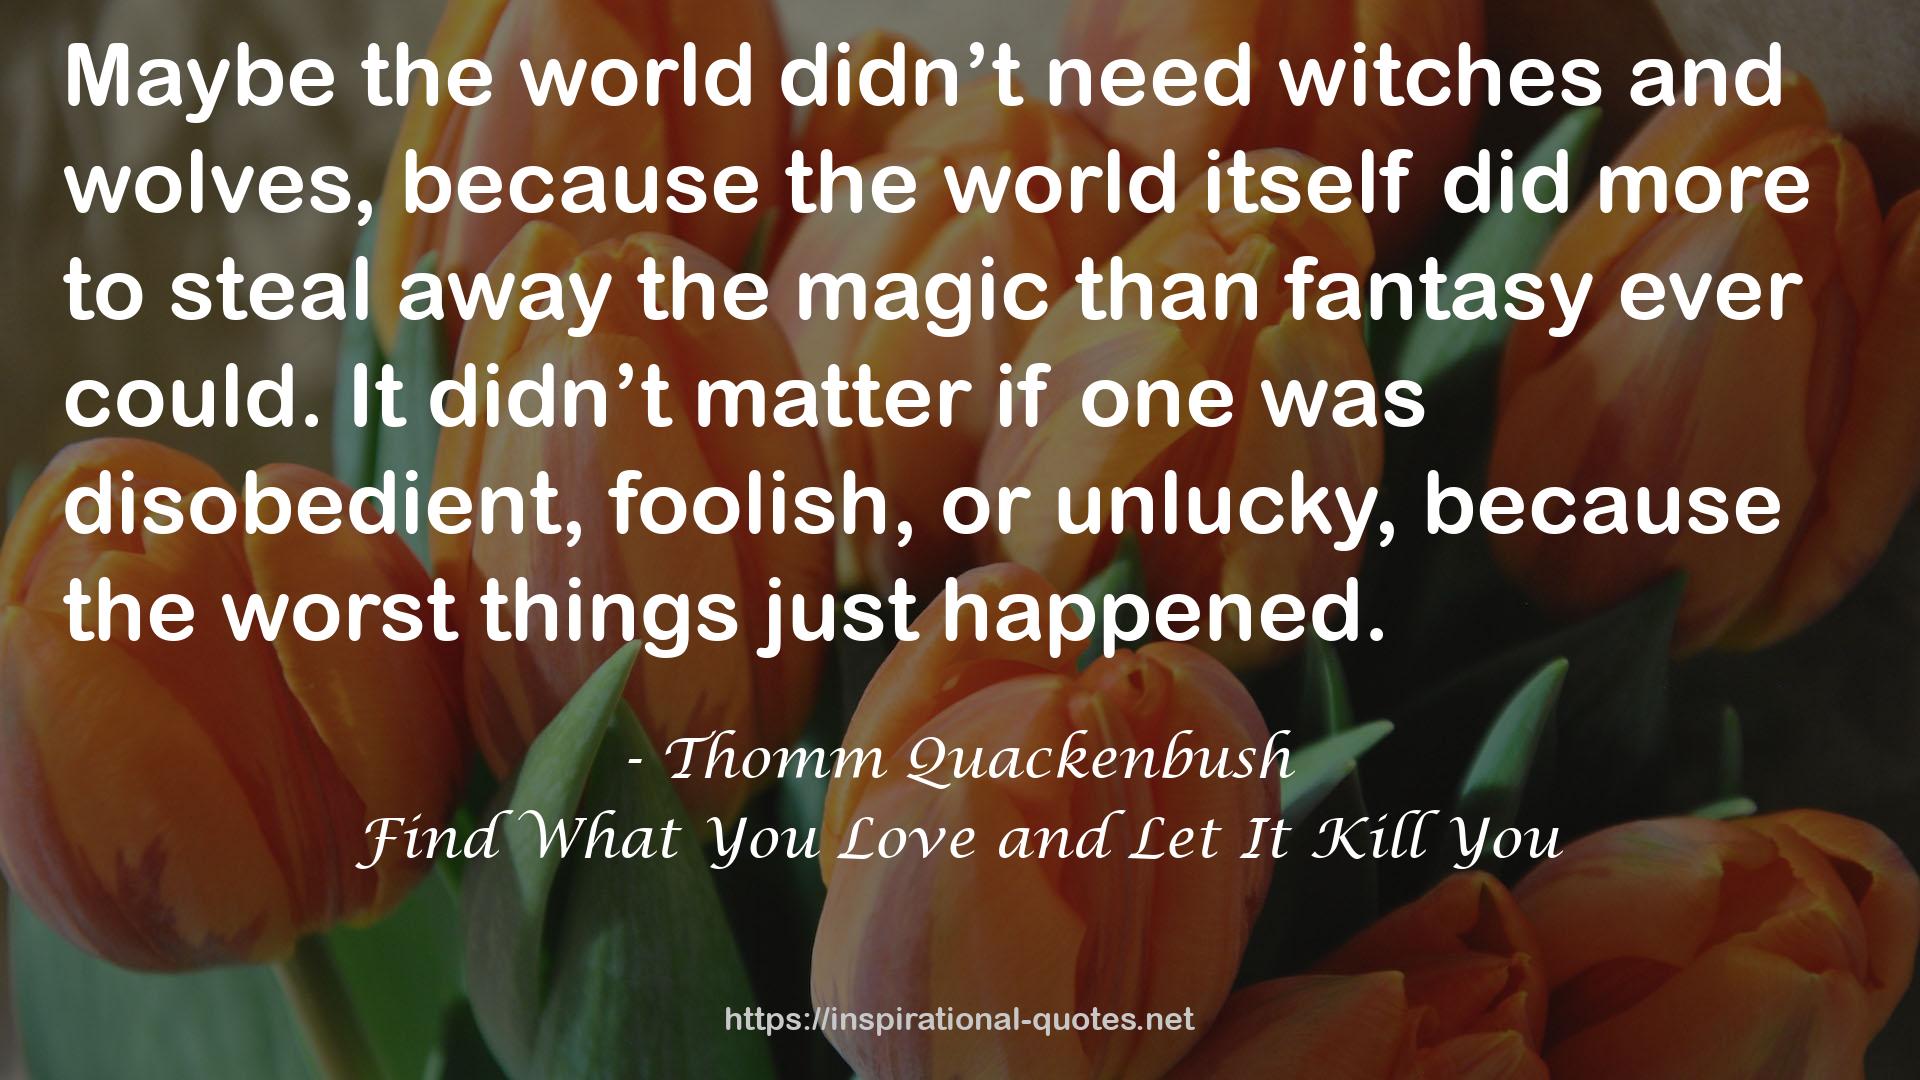 Find What You Love and Let It Kill You QUOTES